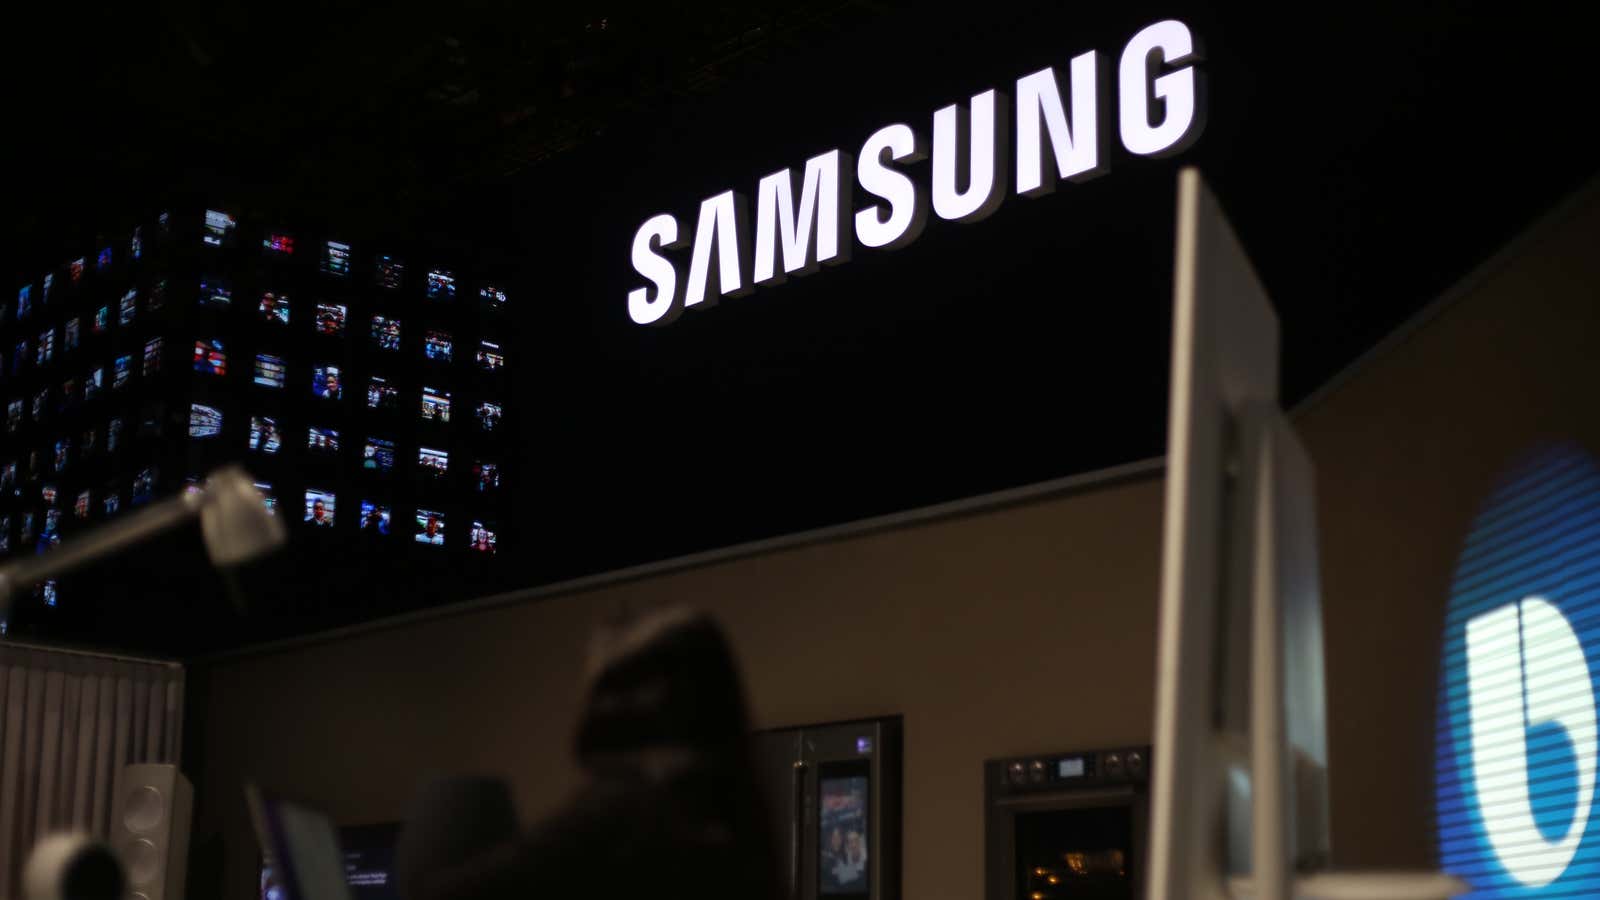 Samsung at the LVCC during CES 2019 in Las Vegas, Nevada.